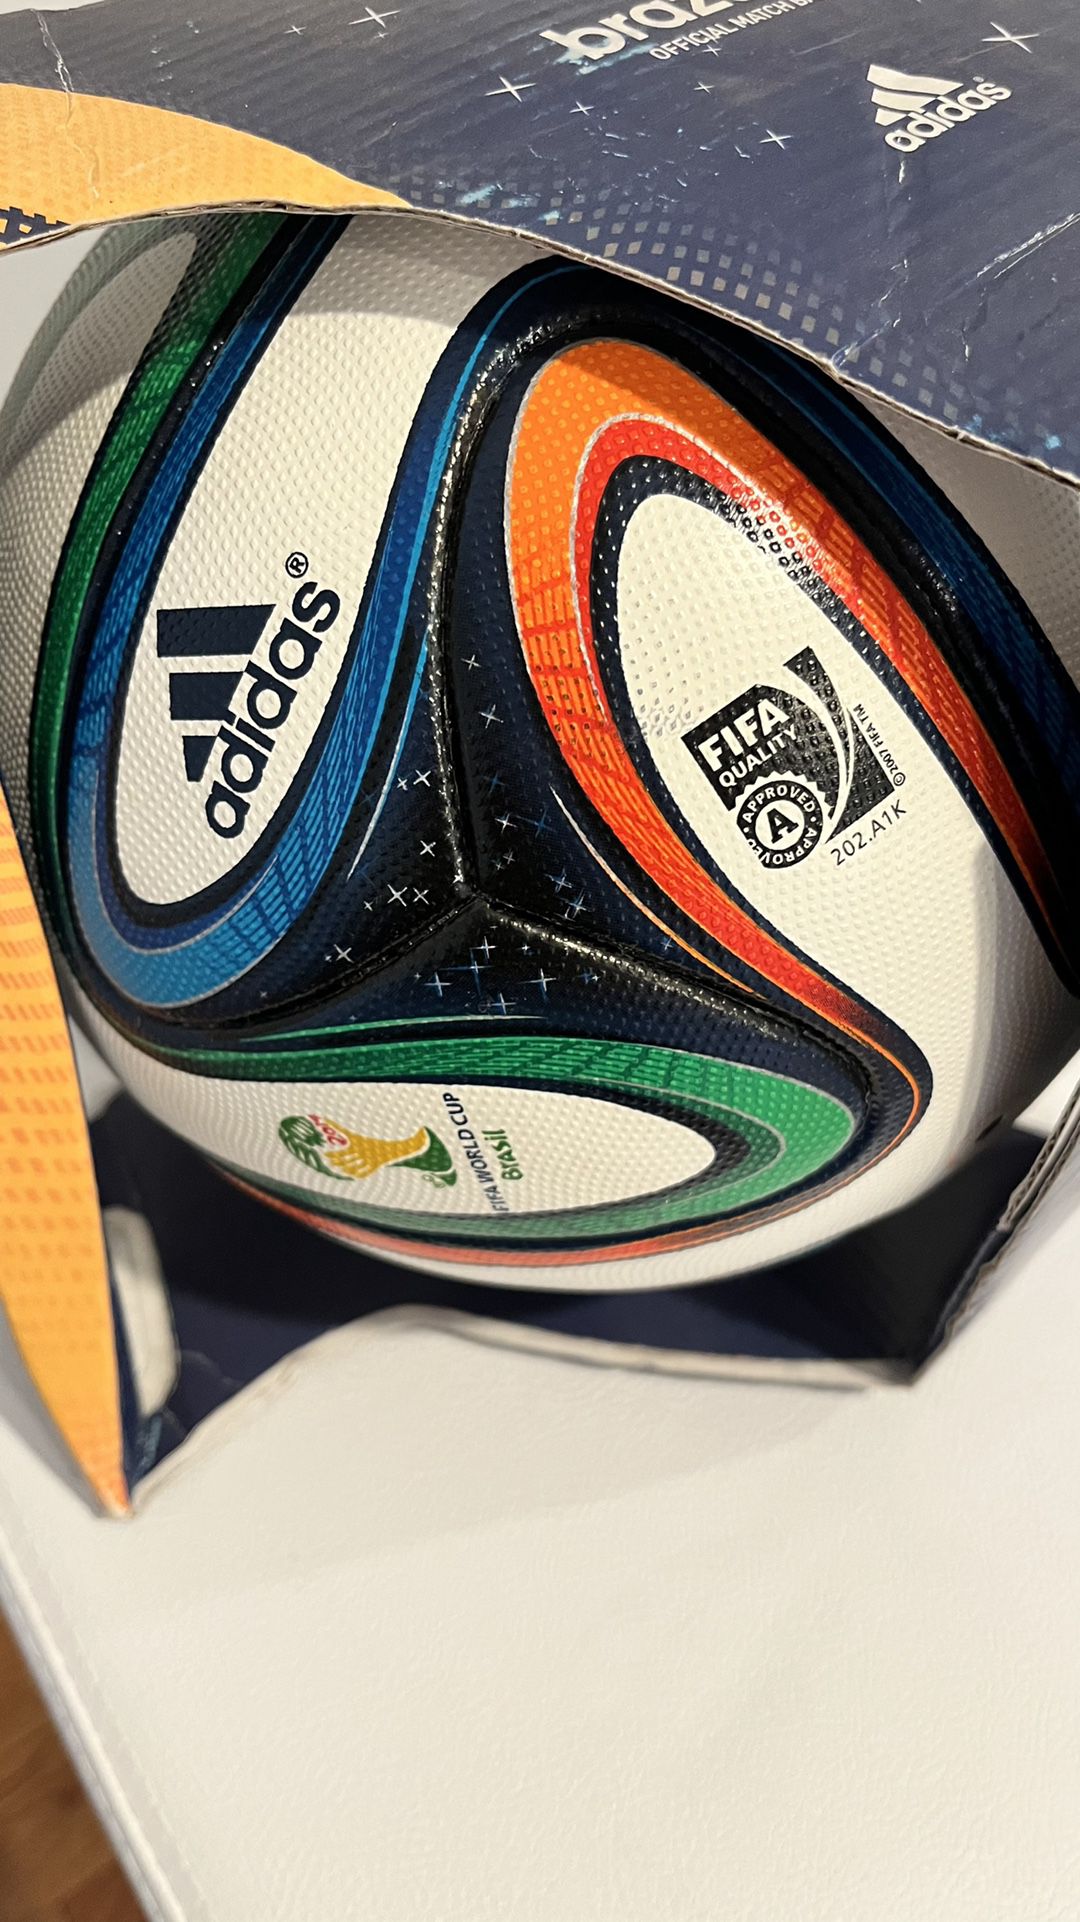 Official ball of the team of Brazil bought for the Final…